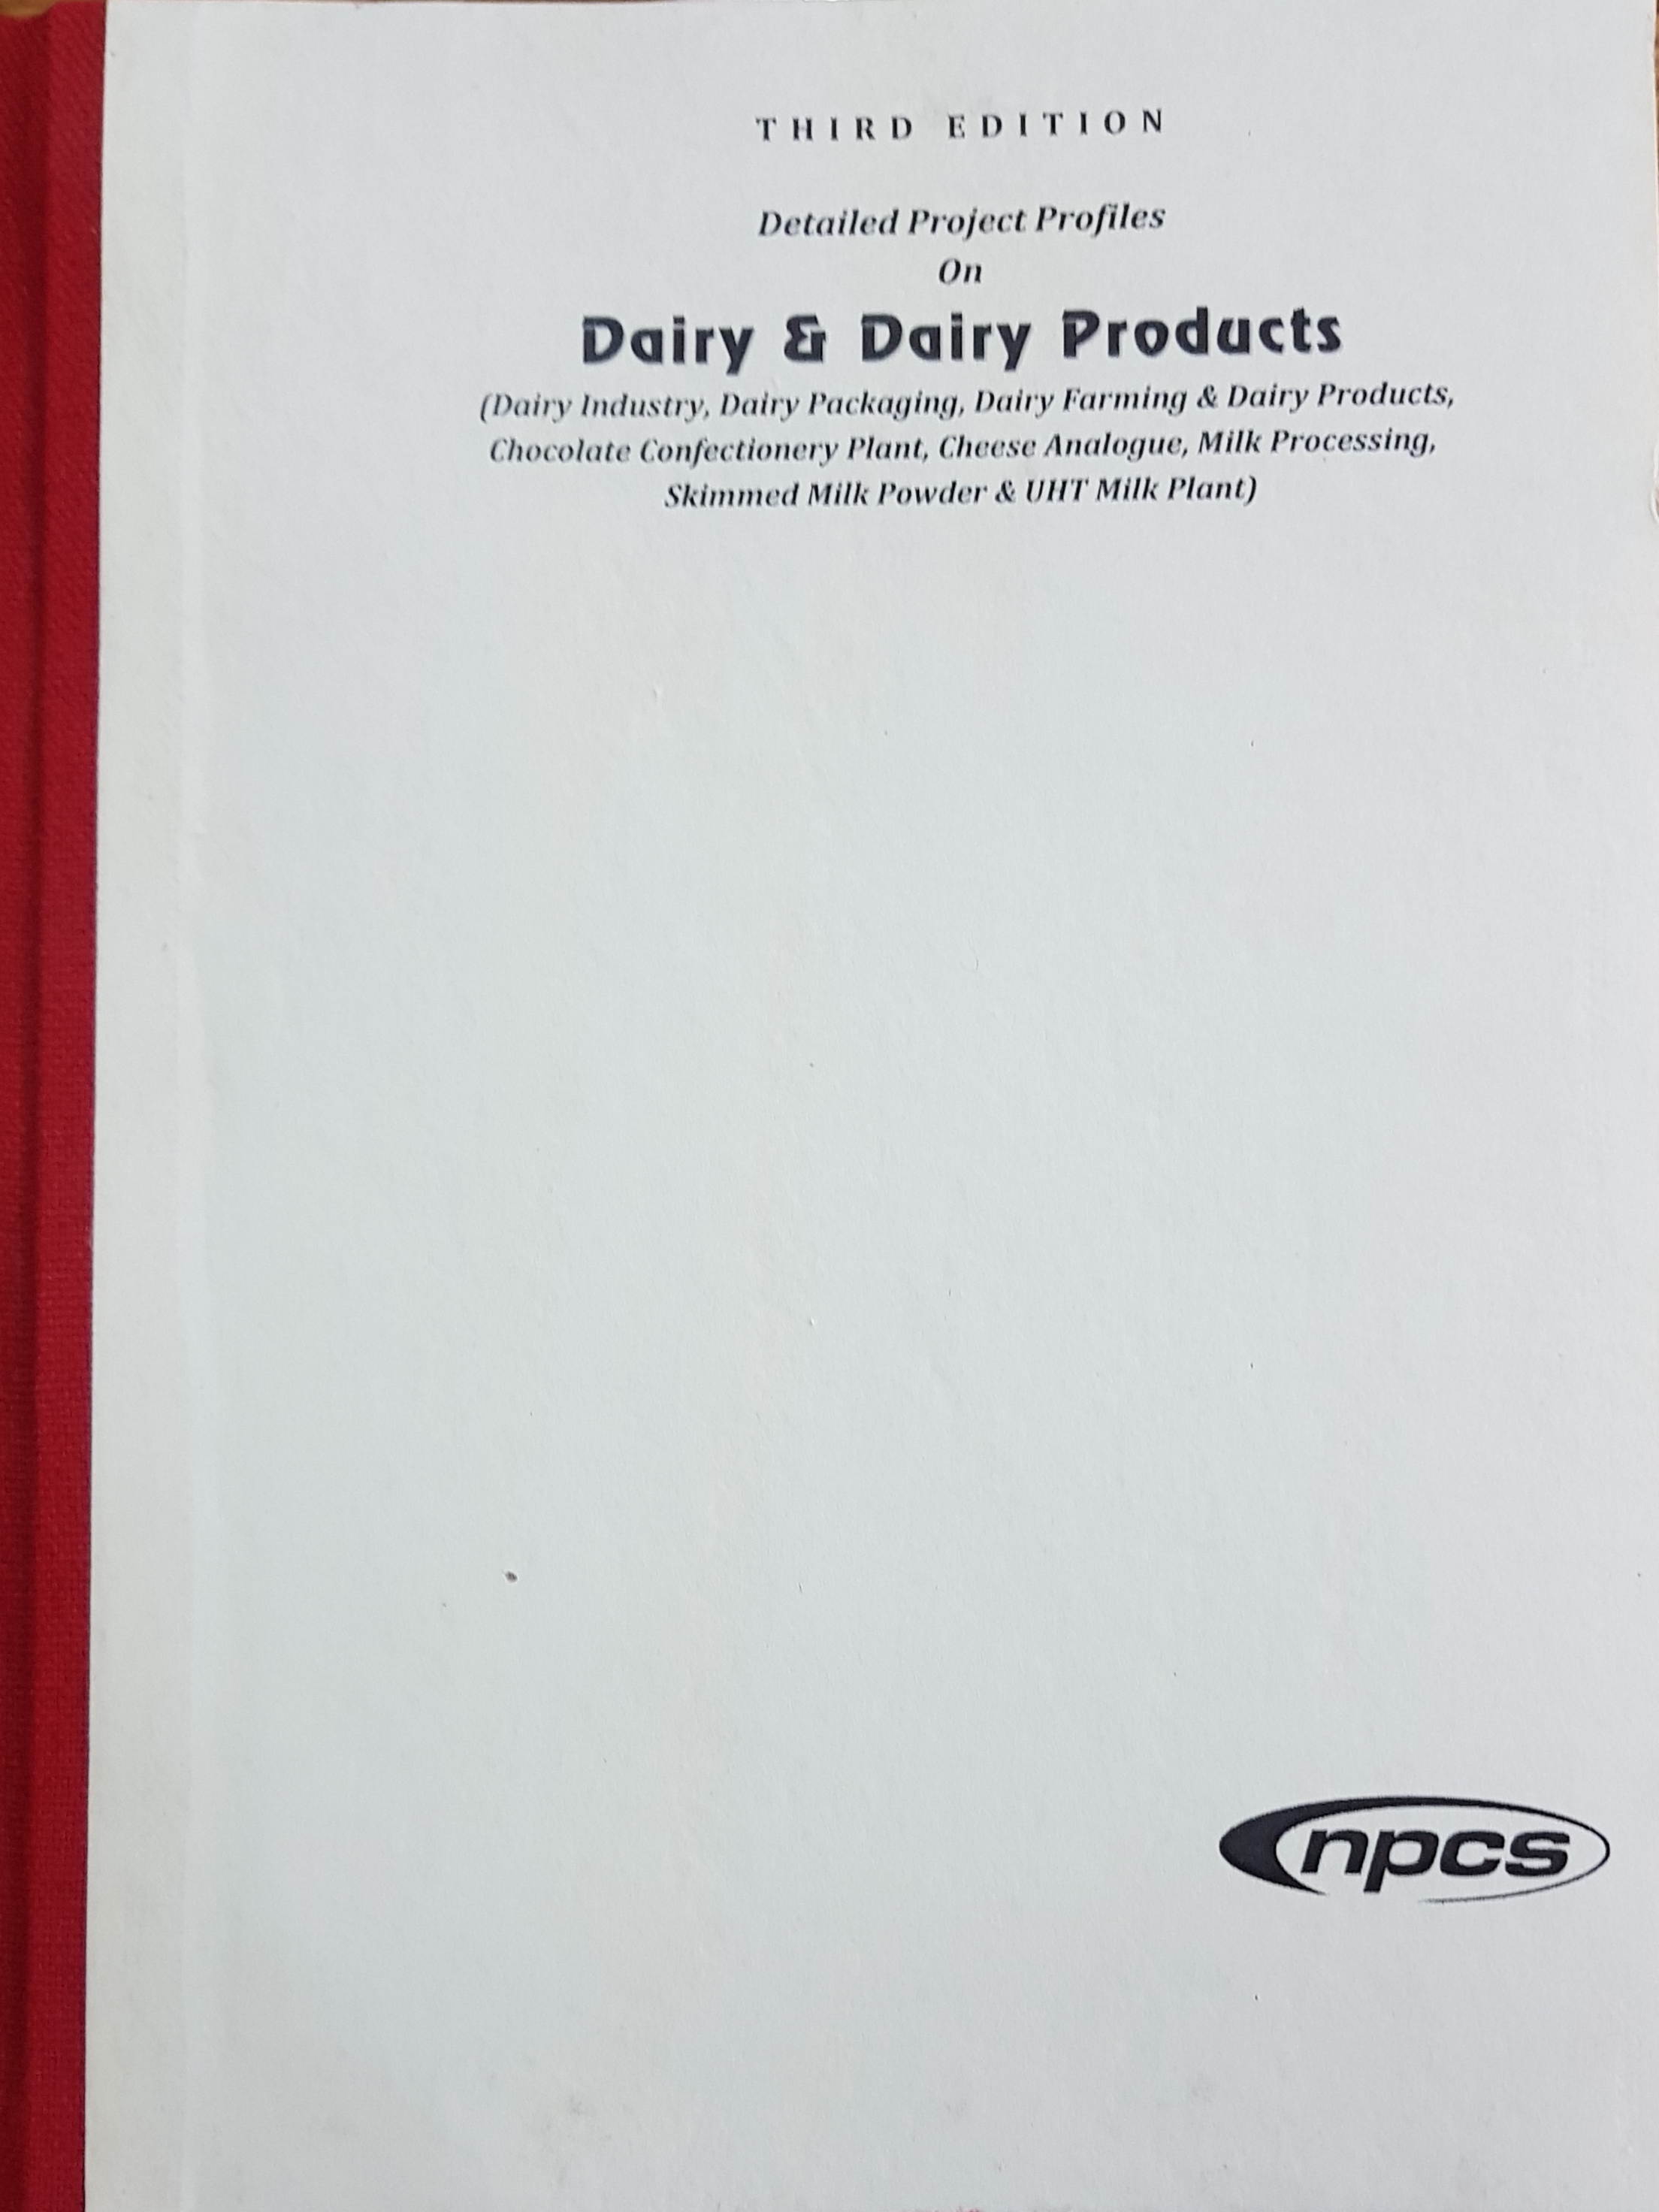 Detailed Project Profiles on Dairy & Dairy Products (Dairy Industry, Dairy Packaging, Dairy Farming & Dairy Products, Chocolate Confectionery Plant, Cheese Analogue, Milk Processing, Skimmed Milk Powder & UHT Milk Plant) (3rd Edn.)#